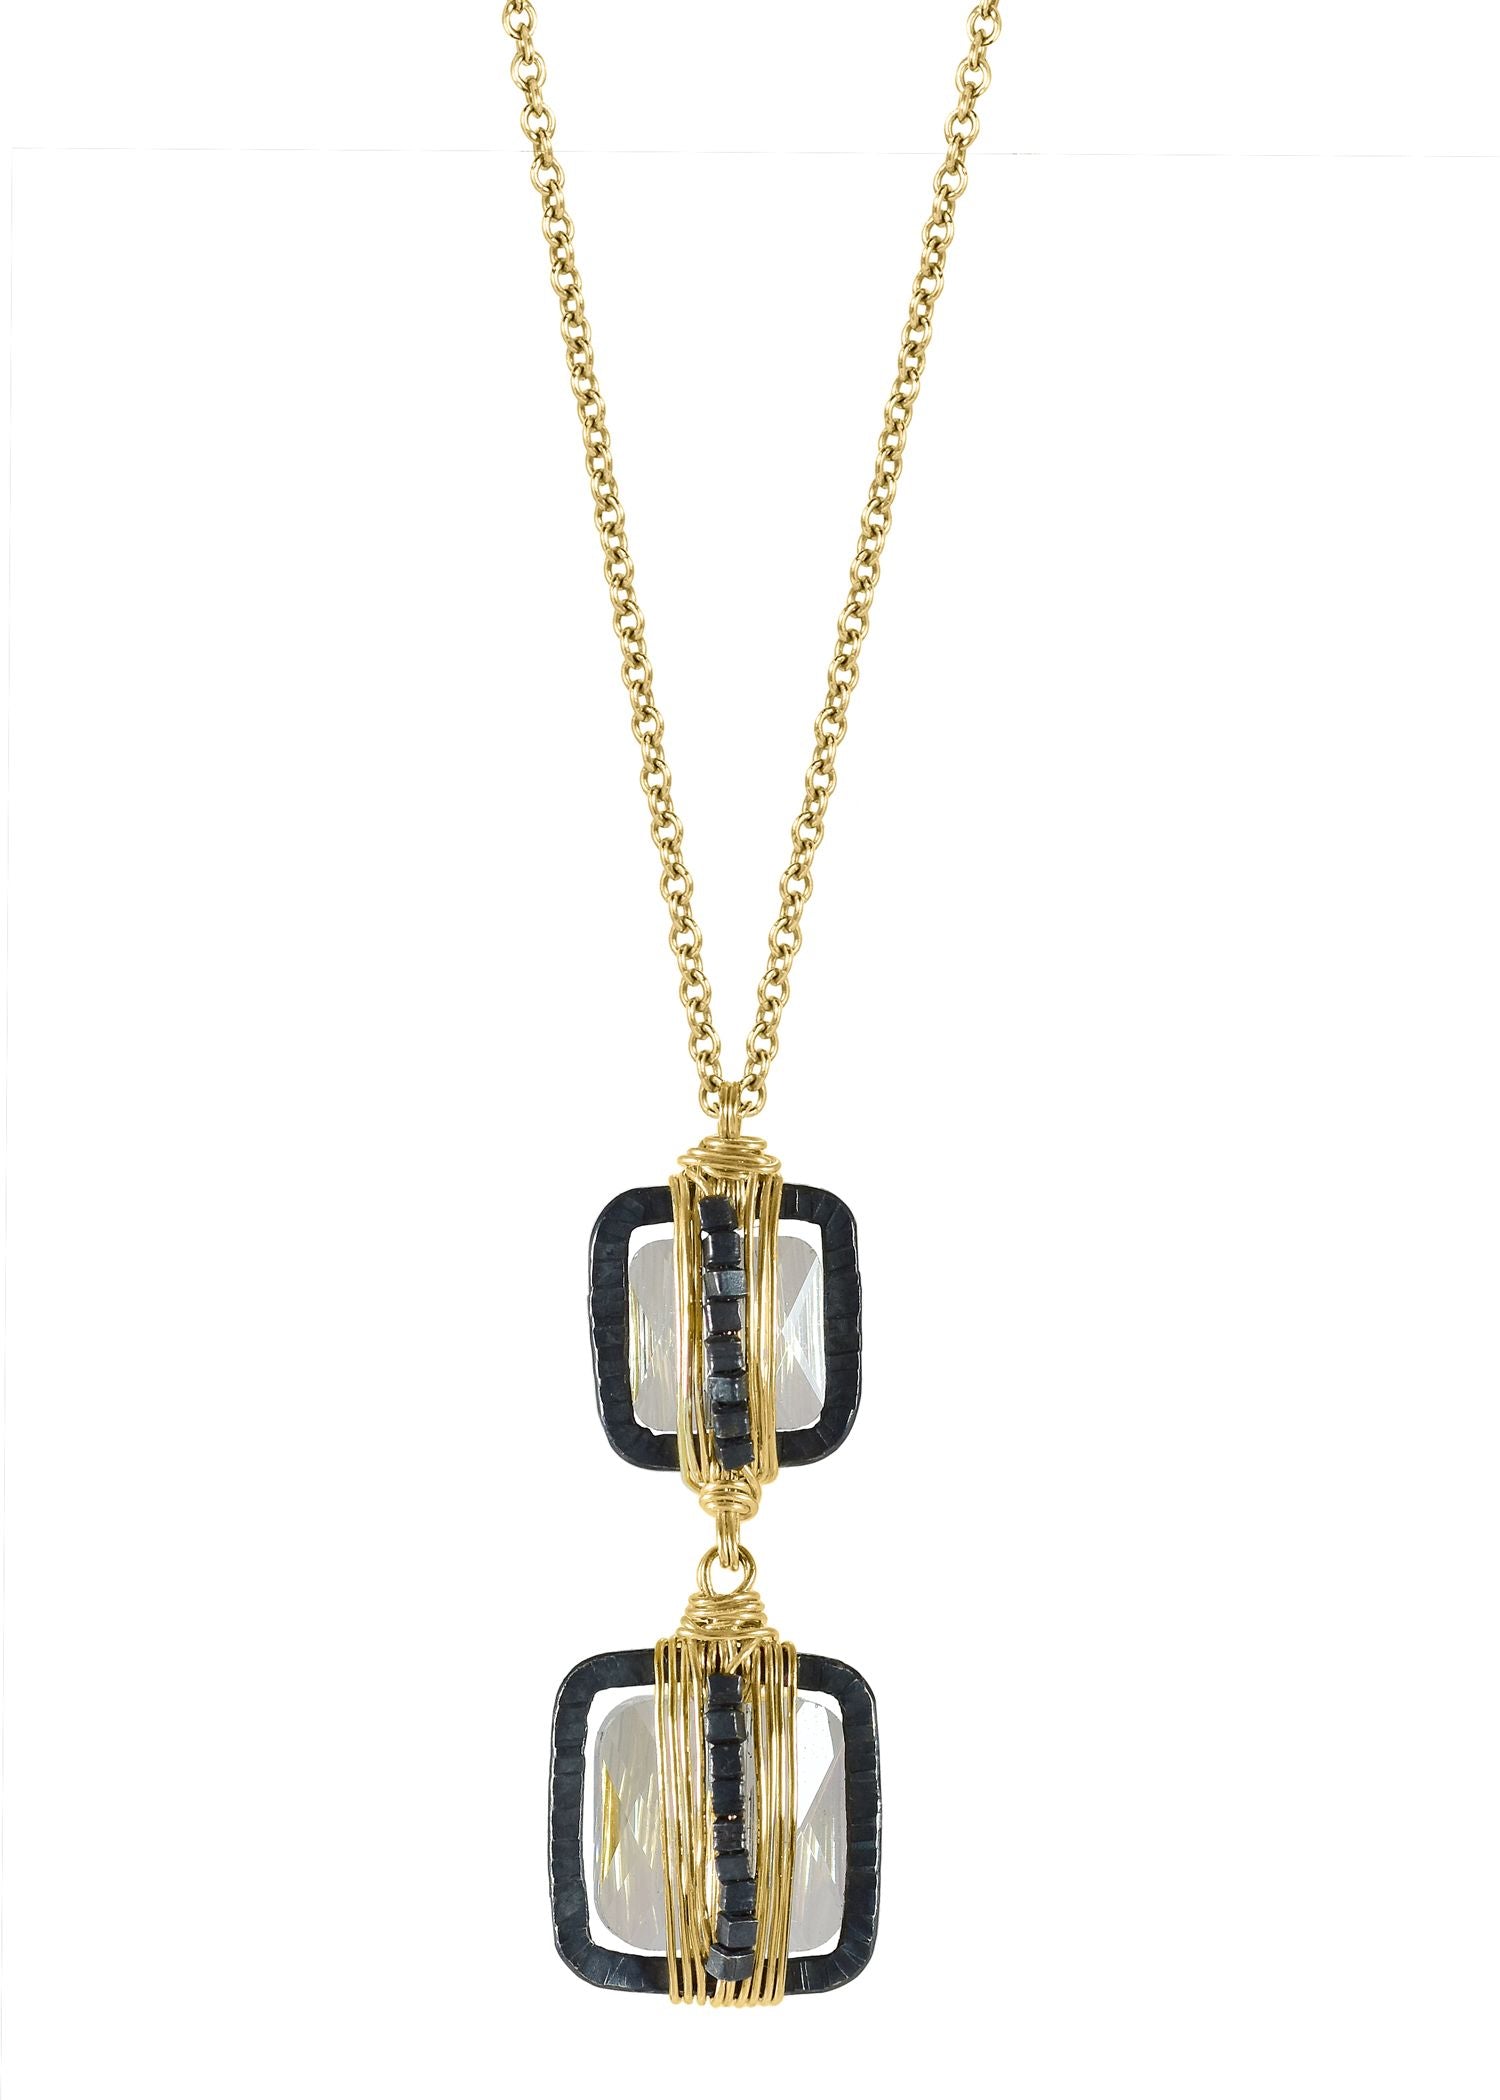 Crystal 14k gold fill Blackened sterling silver Mixed metal Necklace measures 17” in length Pendant measures 1” in length and 3/8” in width Handmade in our Los Angeles studio